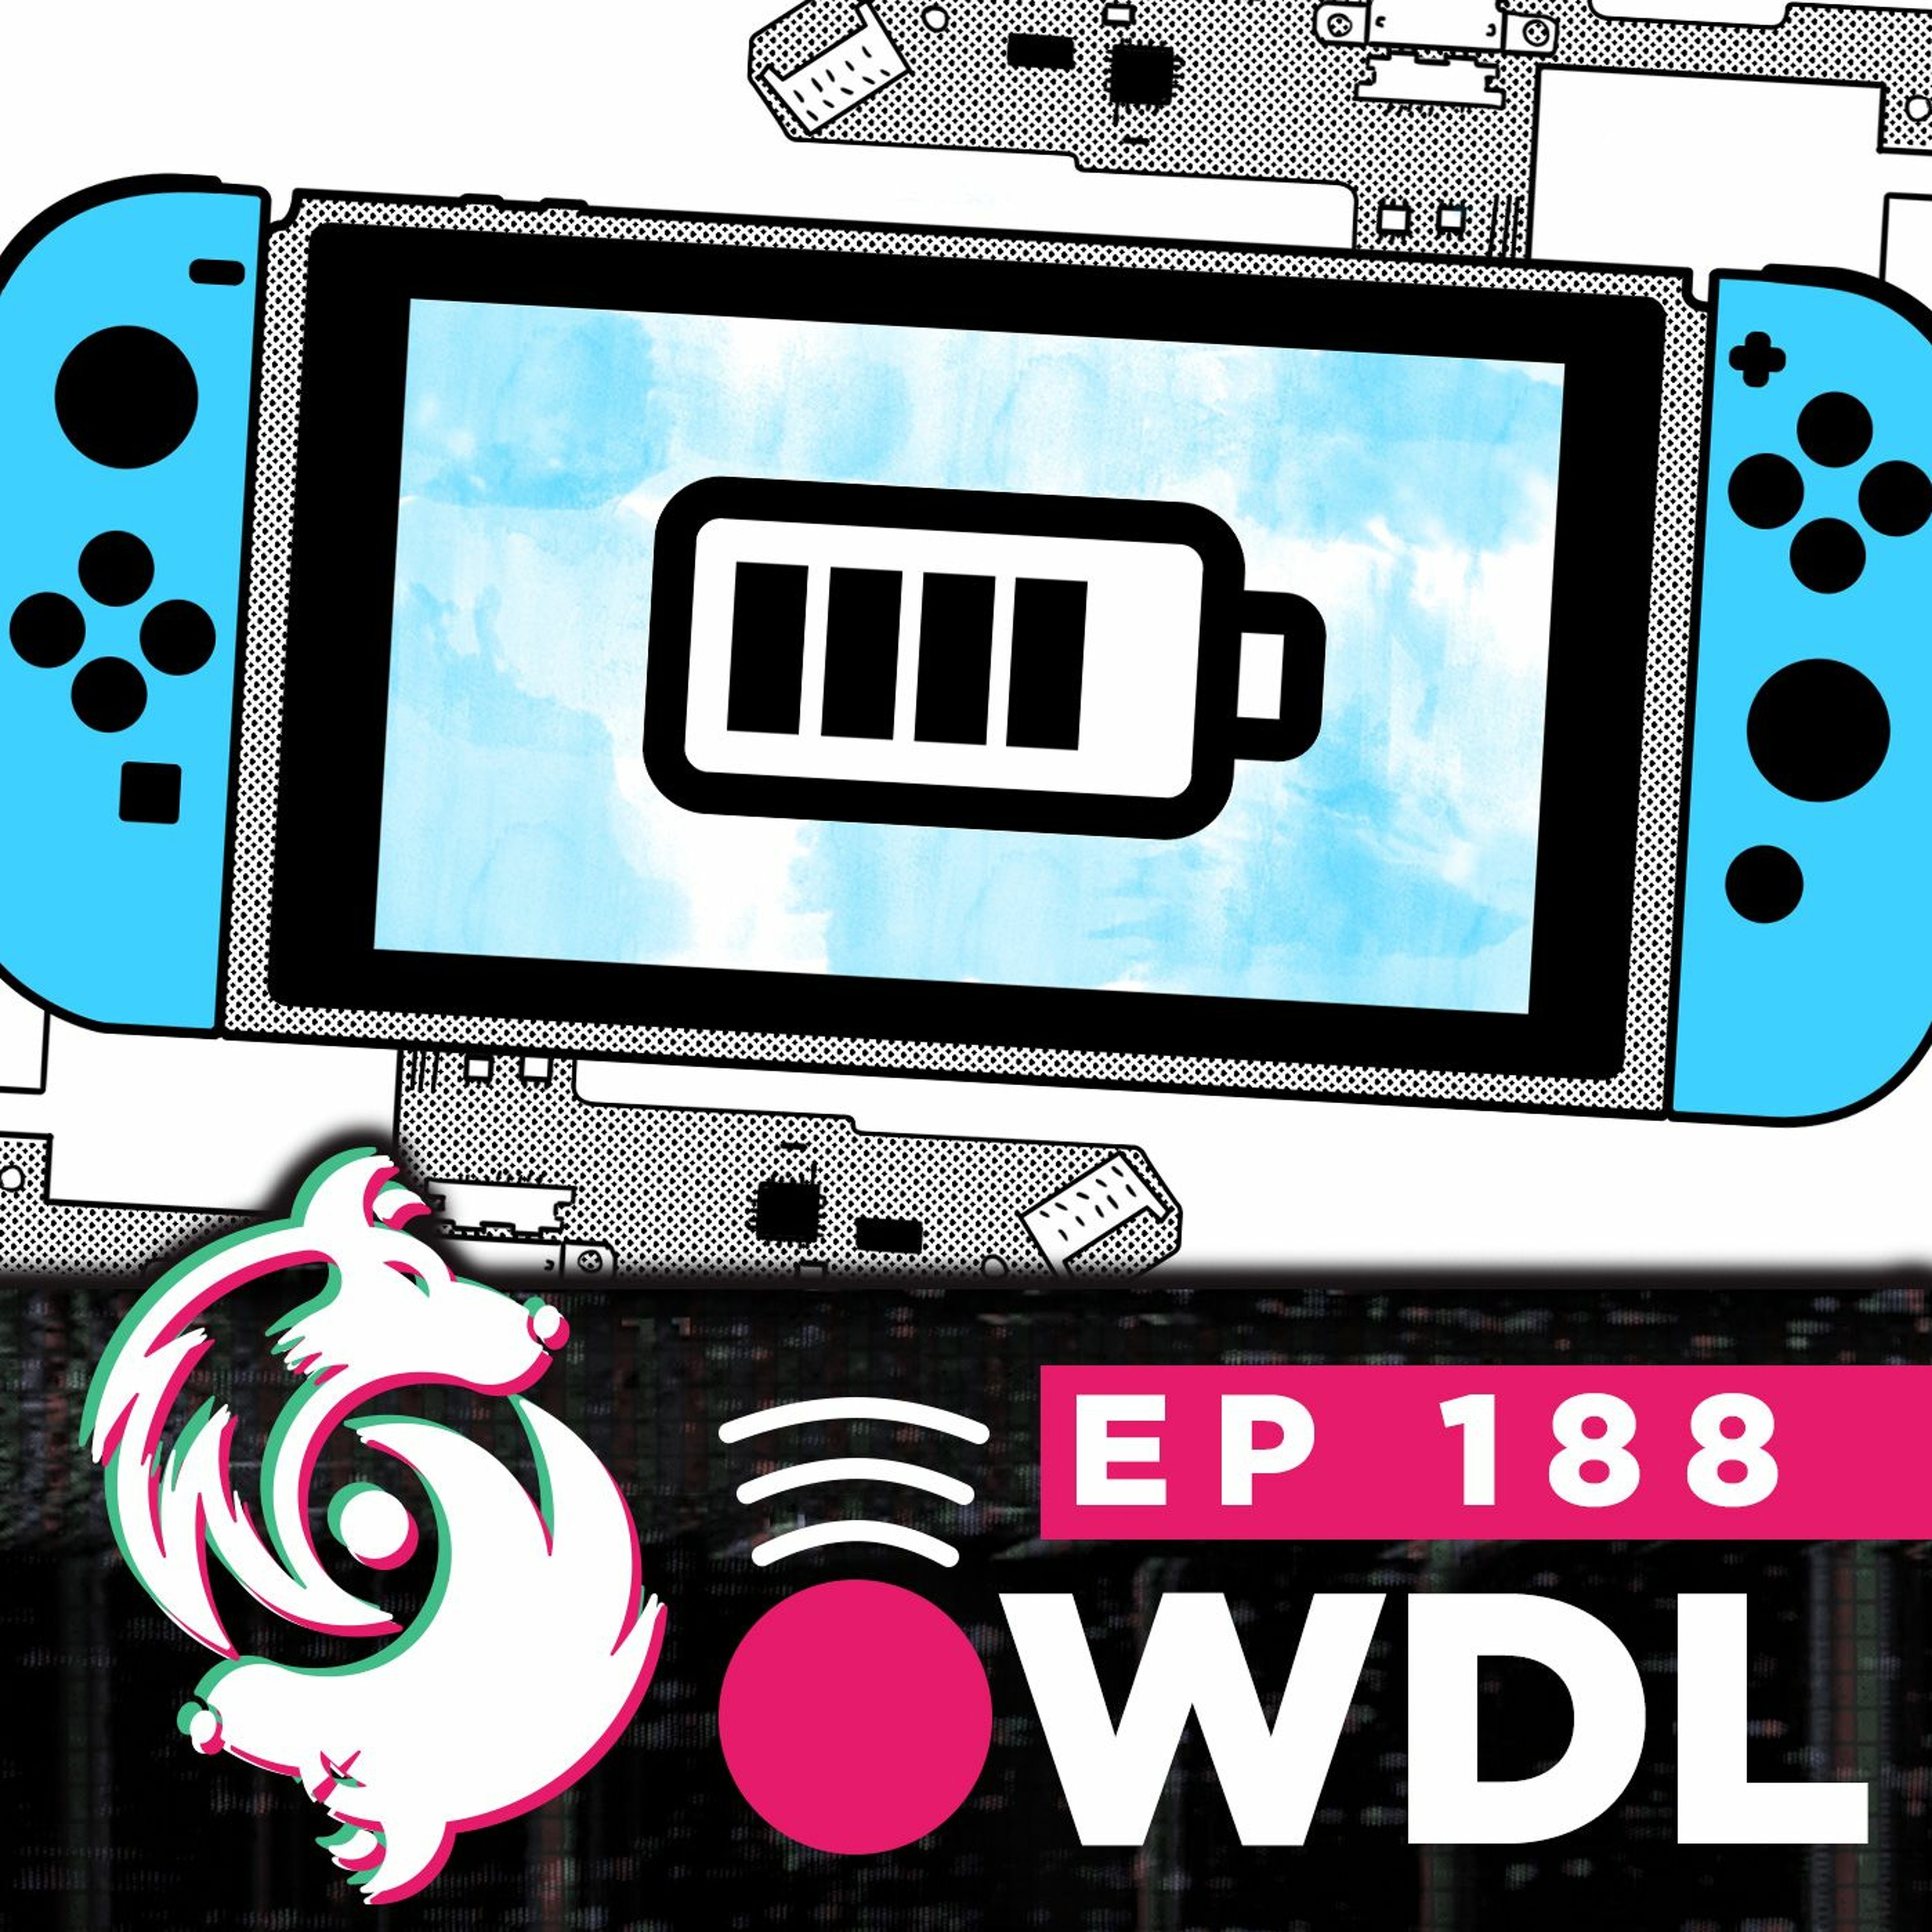 New Nintendo Switch Revision is barely any different - WDL Ep 188